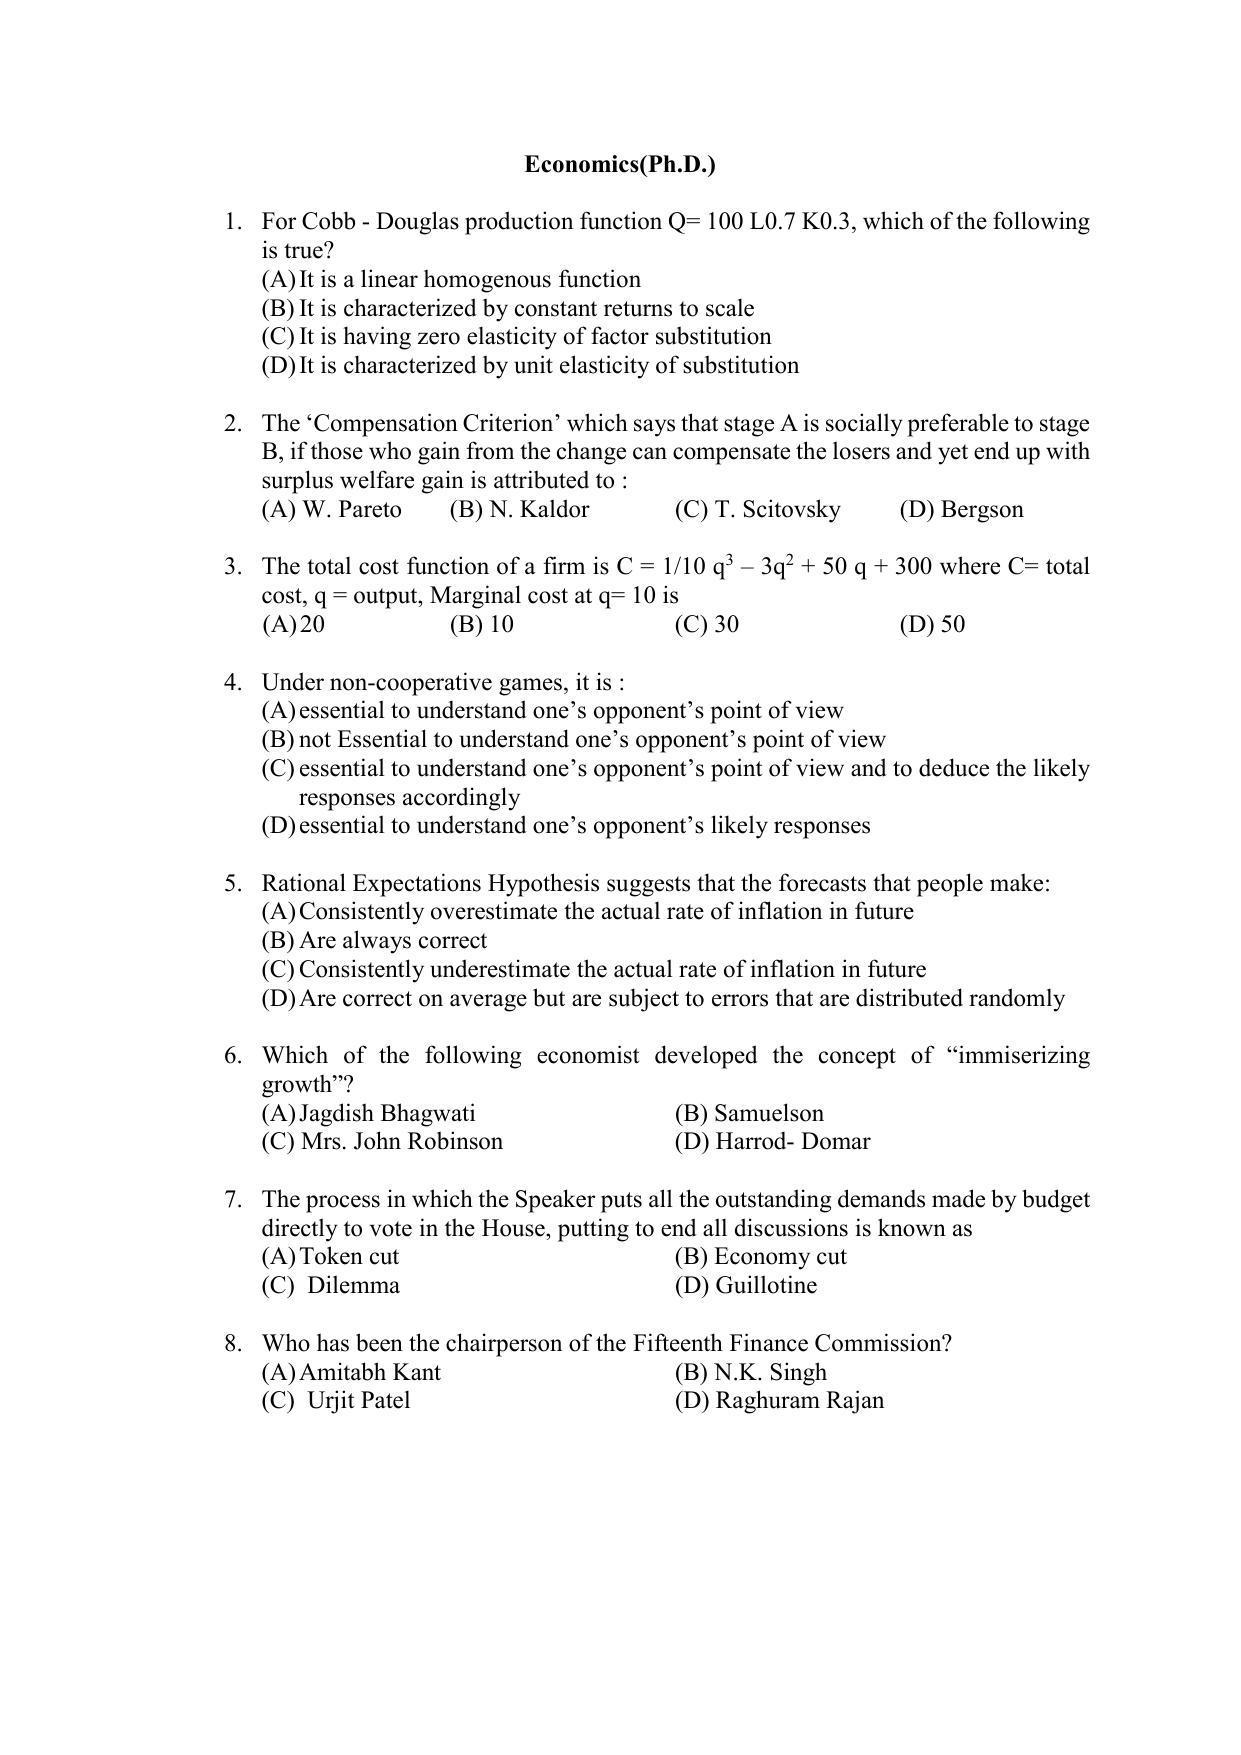 PU MPET Ancient Indian History & Archeology 2022 Question Papers - Page 6